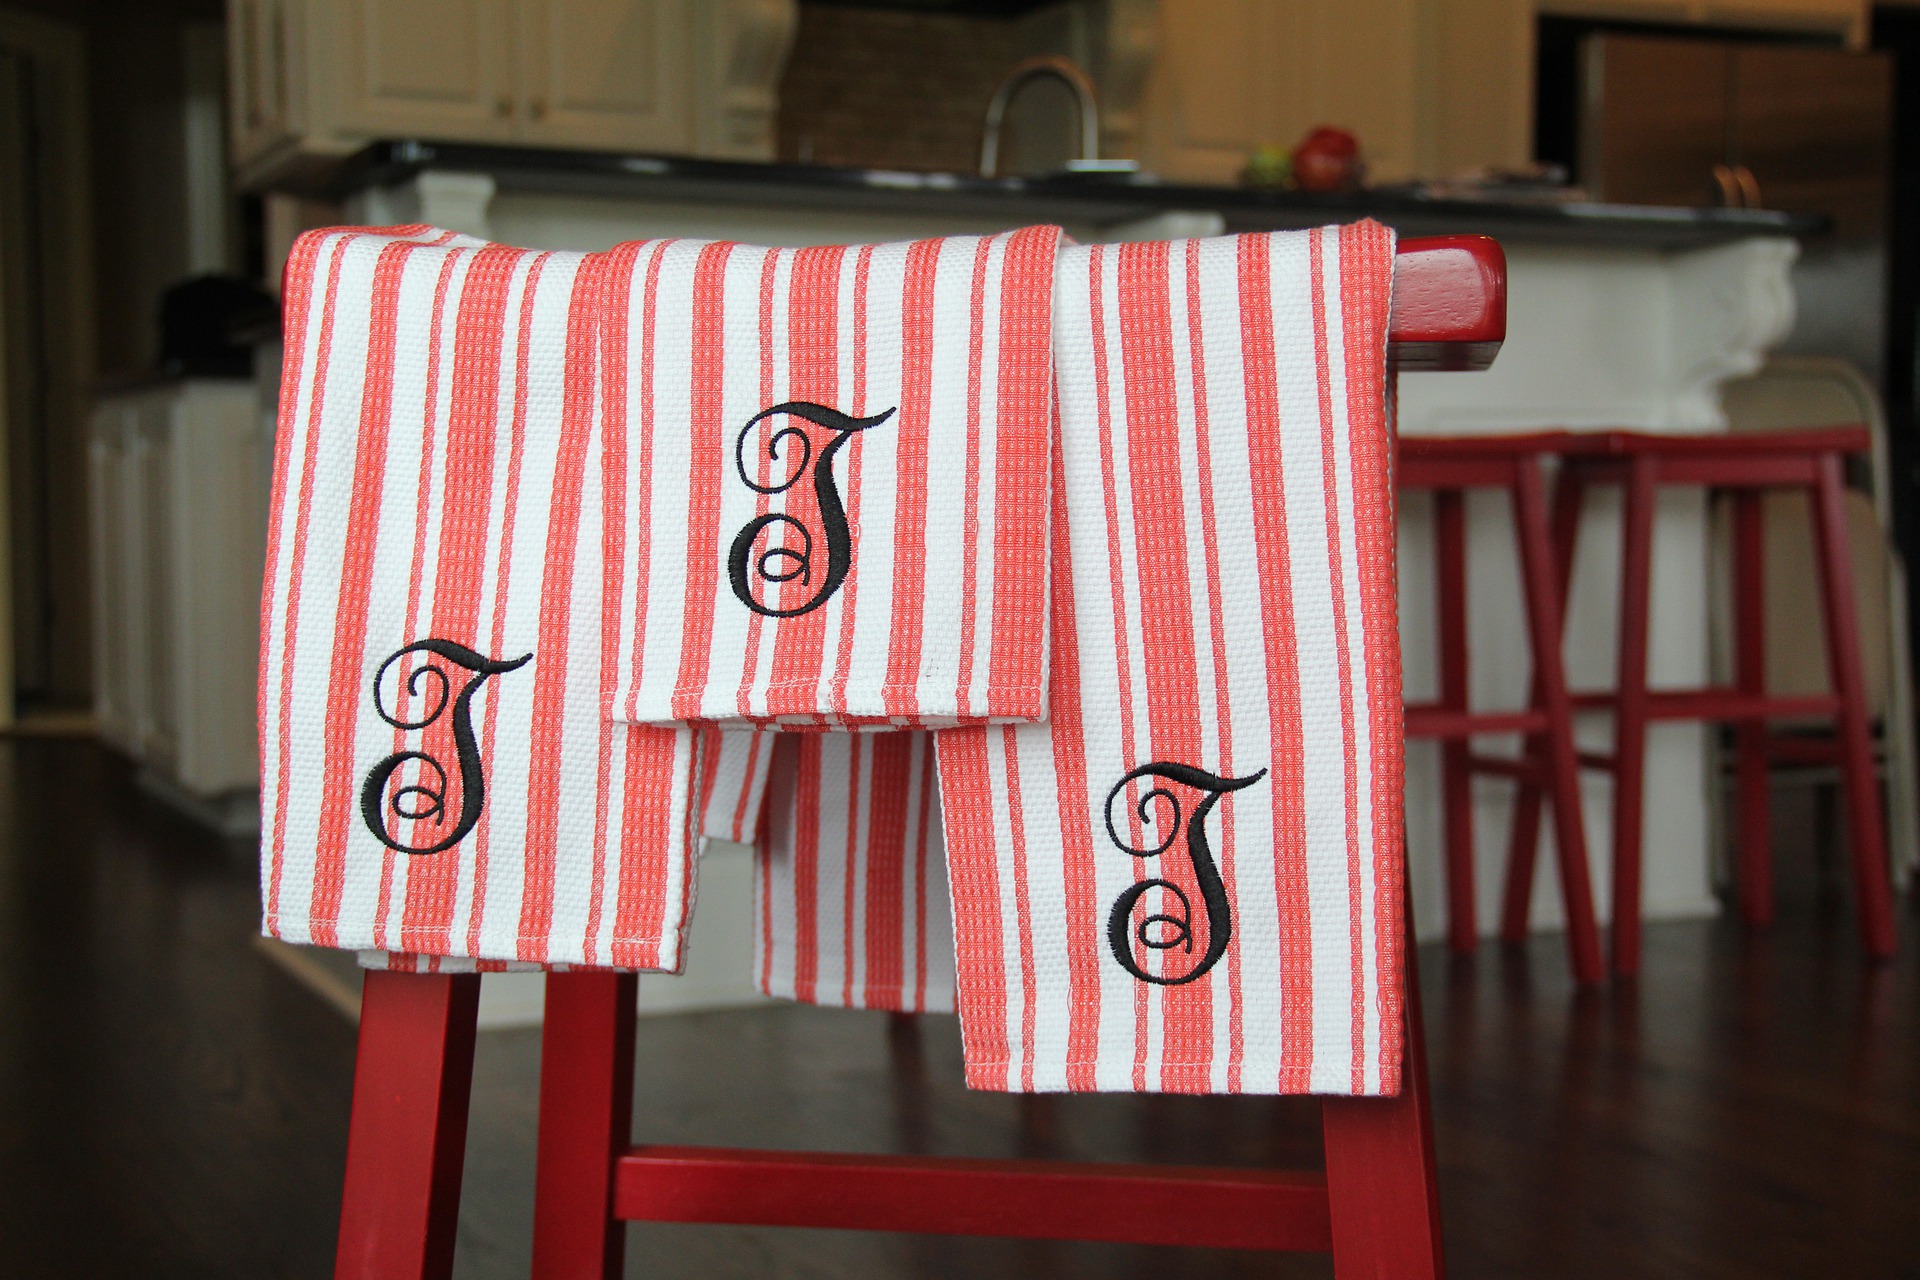 Using Decorative Kitchen Towels to Accessorize your Kitchen